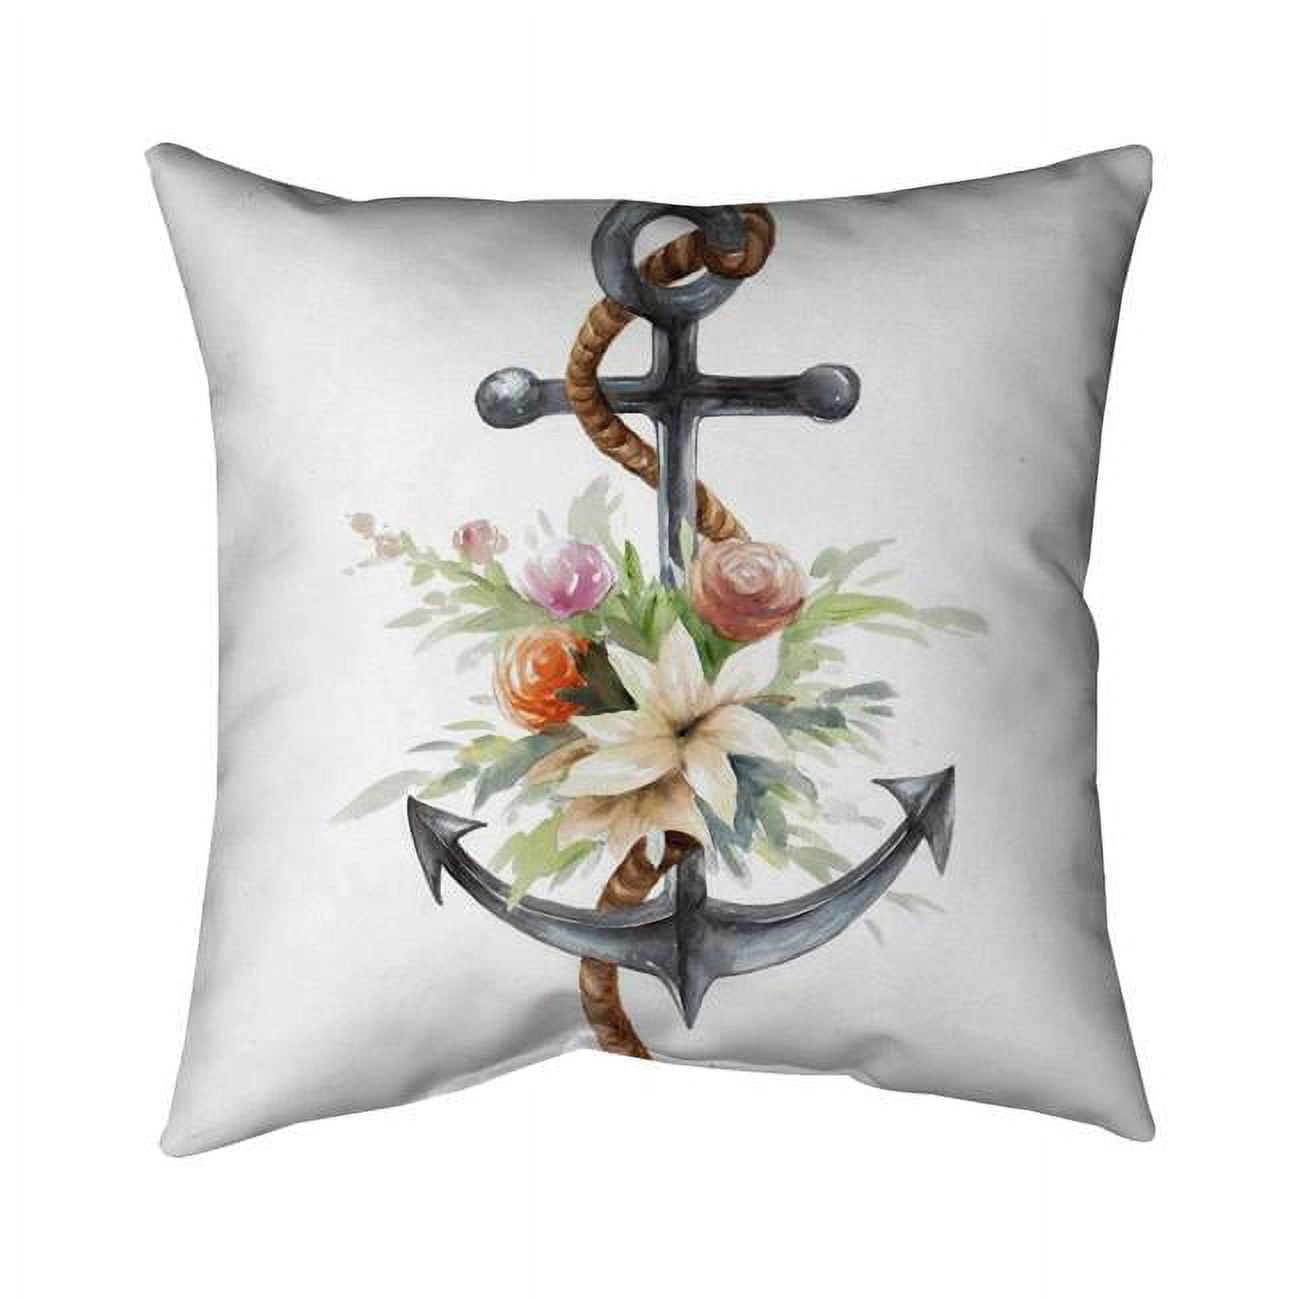 Begin Home Decor 5542-2020-MI87 20 x 20 in. Anchor with Flowers-Double Sided Print Outdoor Pillow Cover